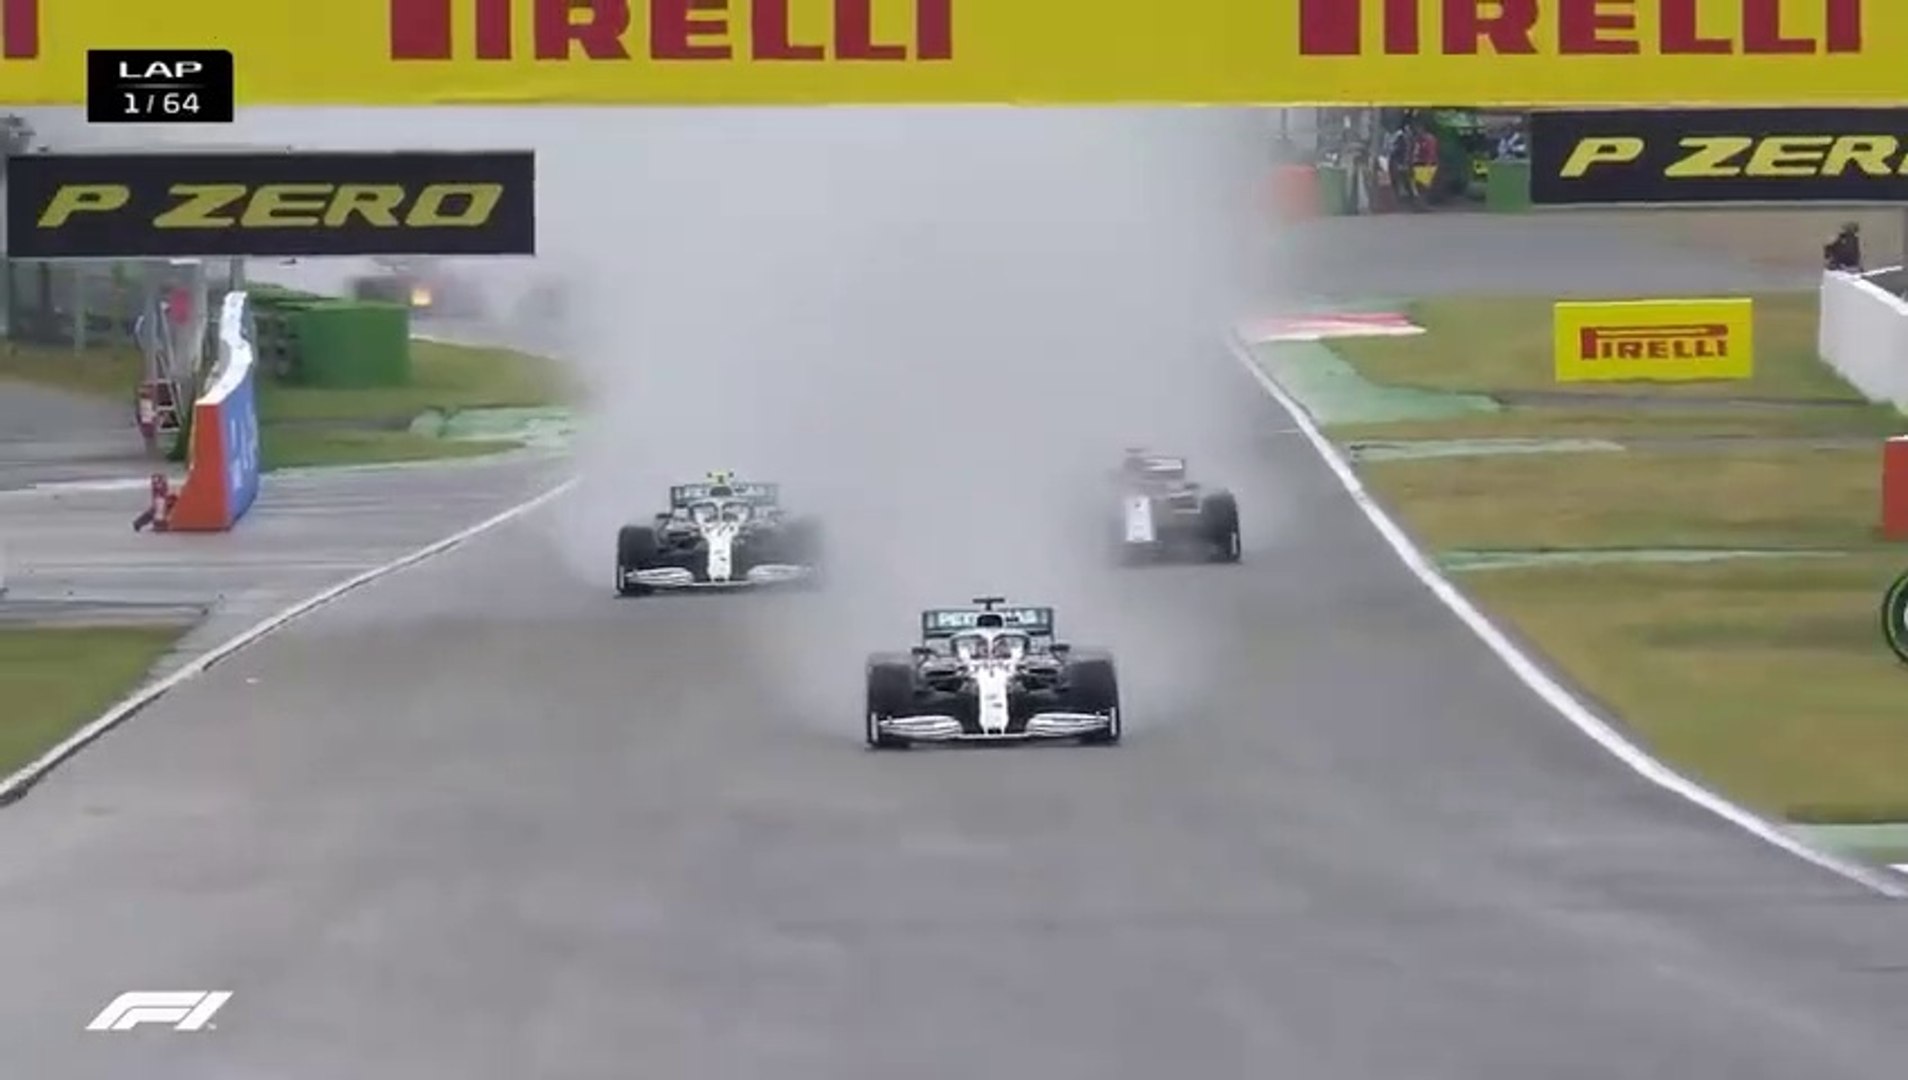 Extended Highlights Of The 2019 German Grand Prix - video Dailymotion